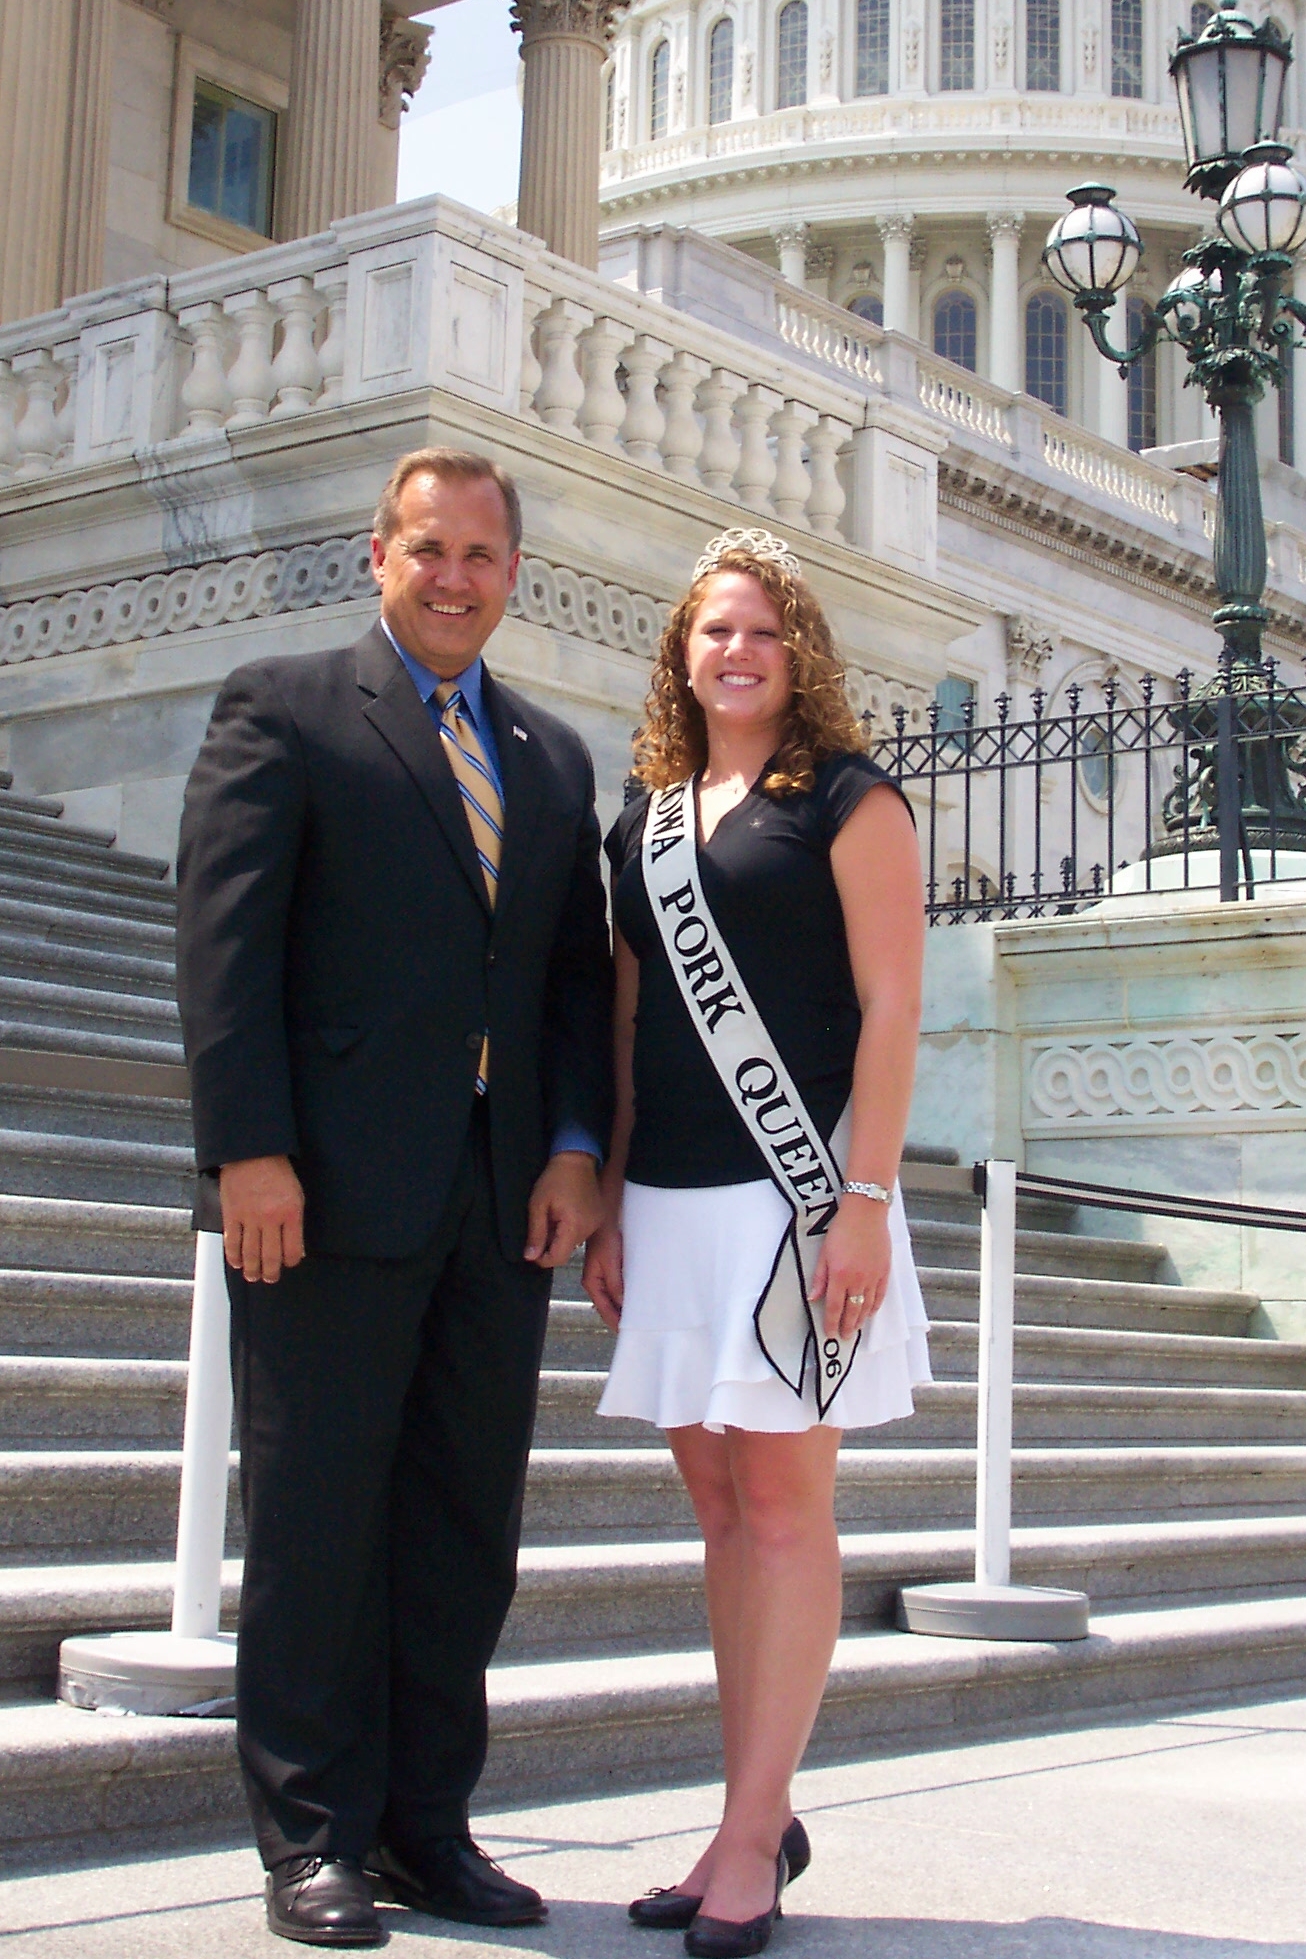 Jim with Iowa Pork Queen, Amber Appleton, on the steps of the United States Capitol.